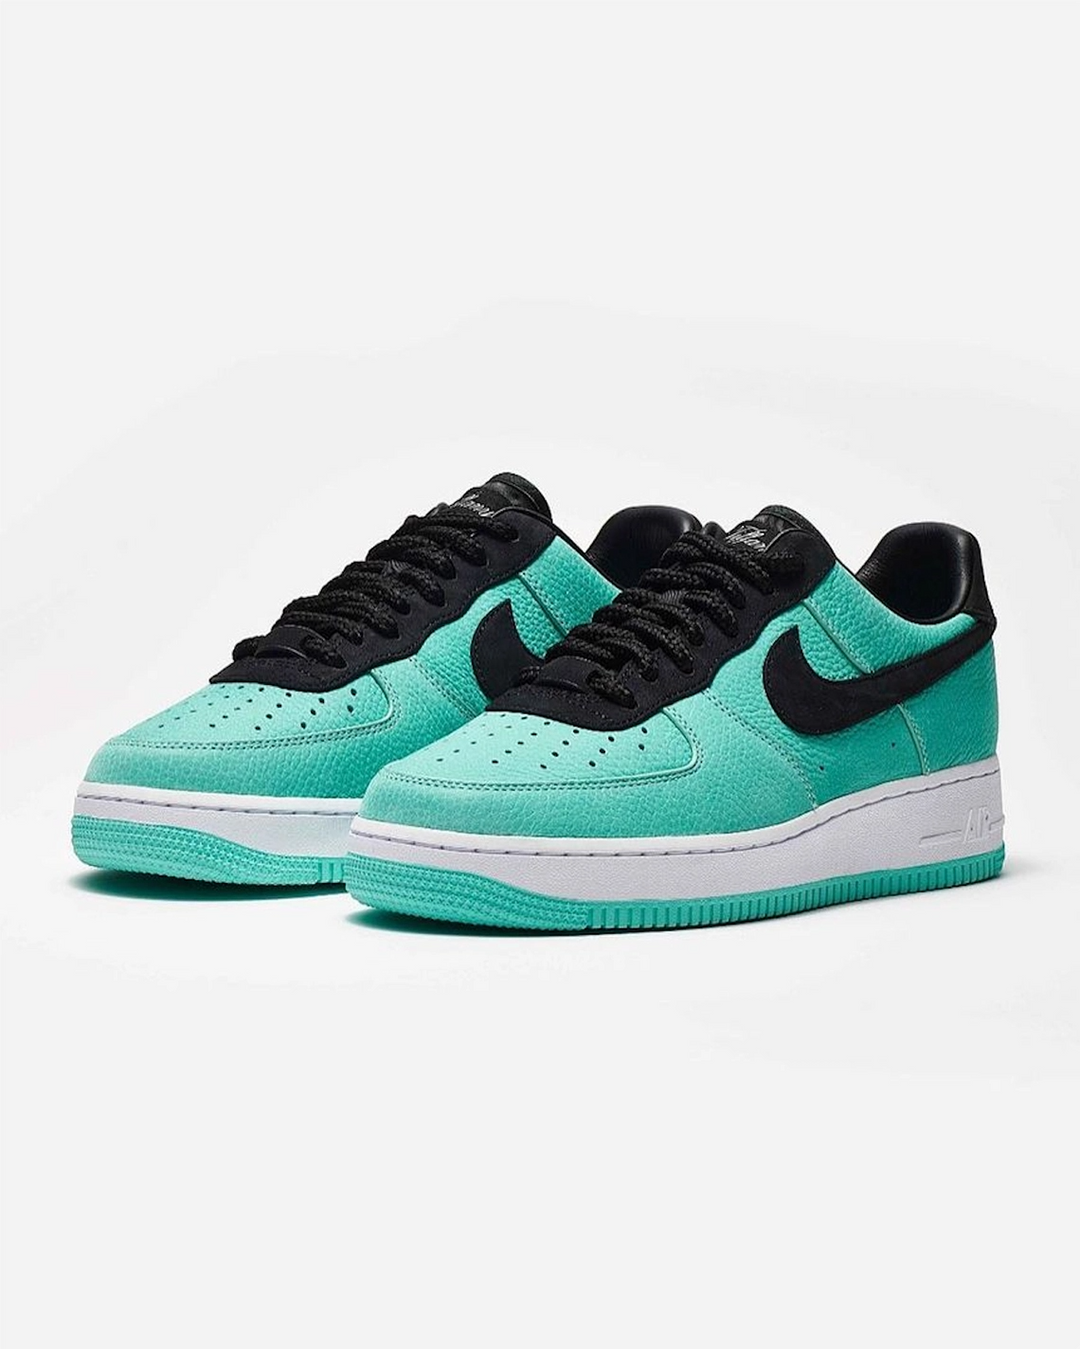 Nike Air Force 1 Low "1837" by Tiffany & Co. is now available in a friends and family version.